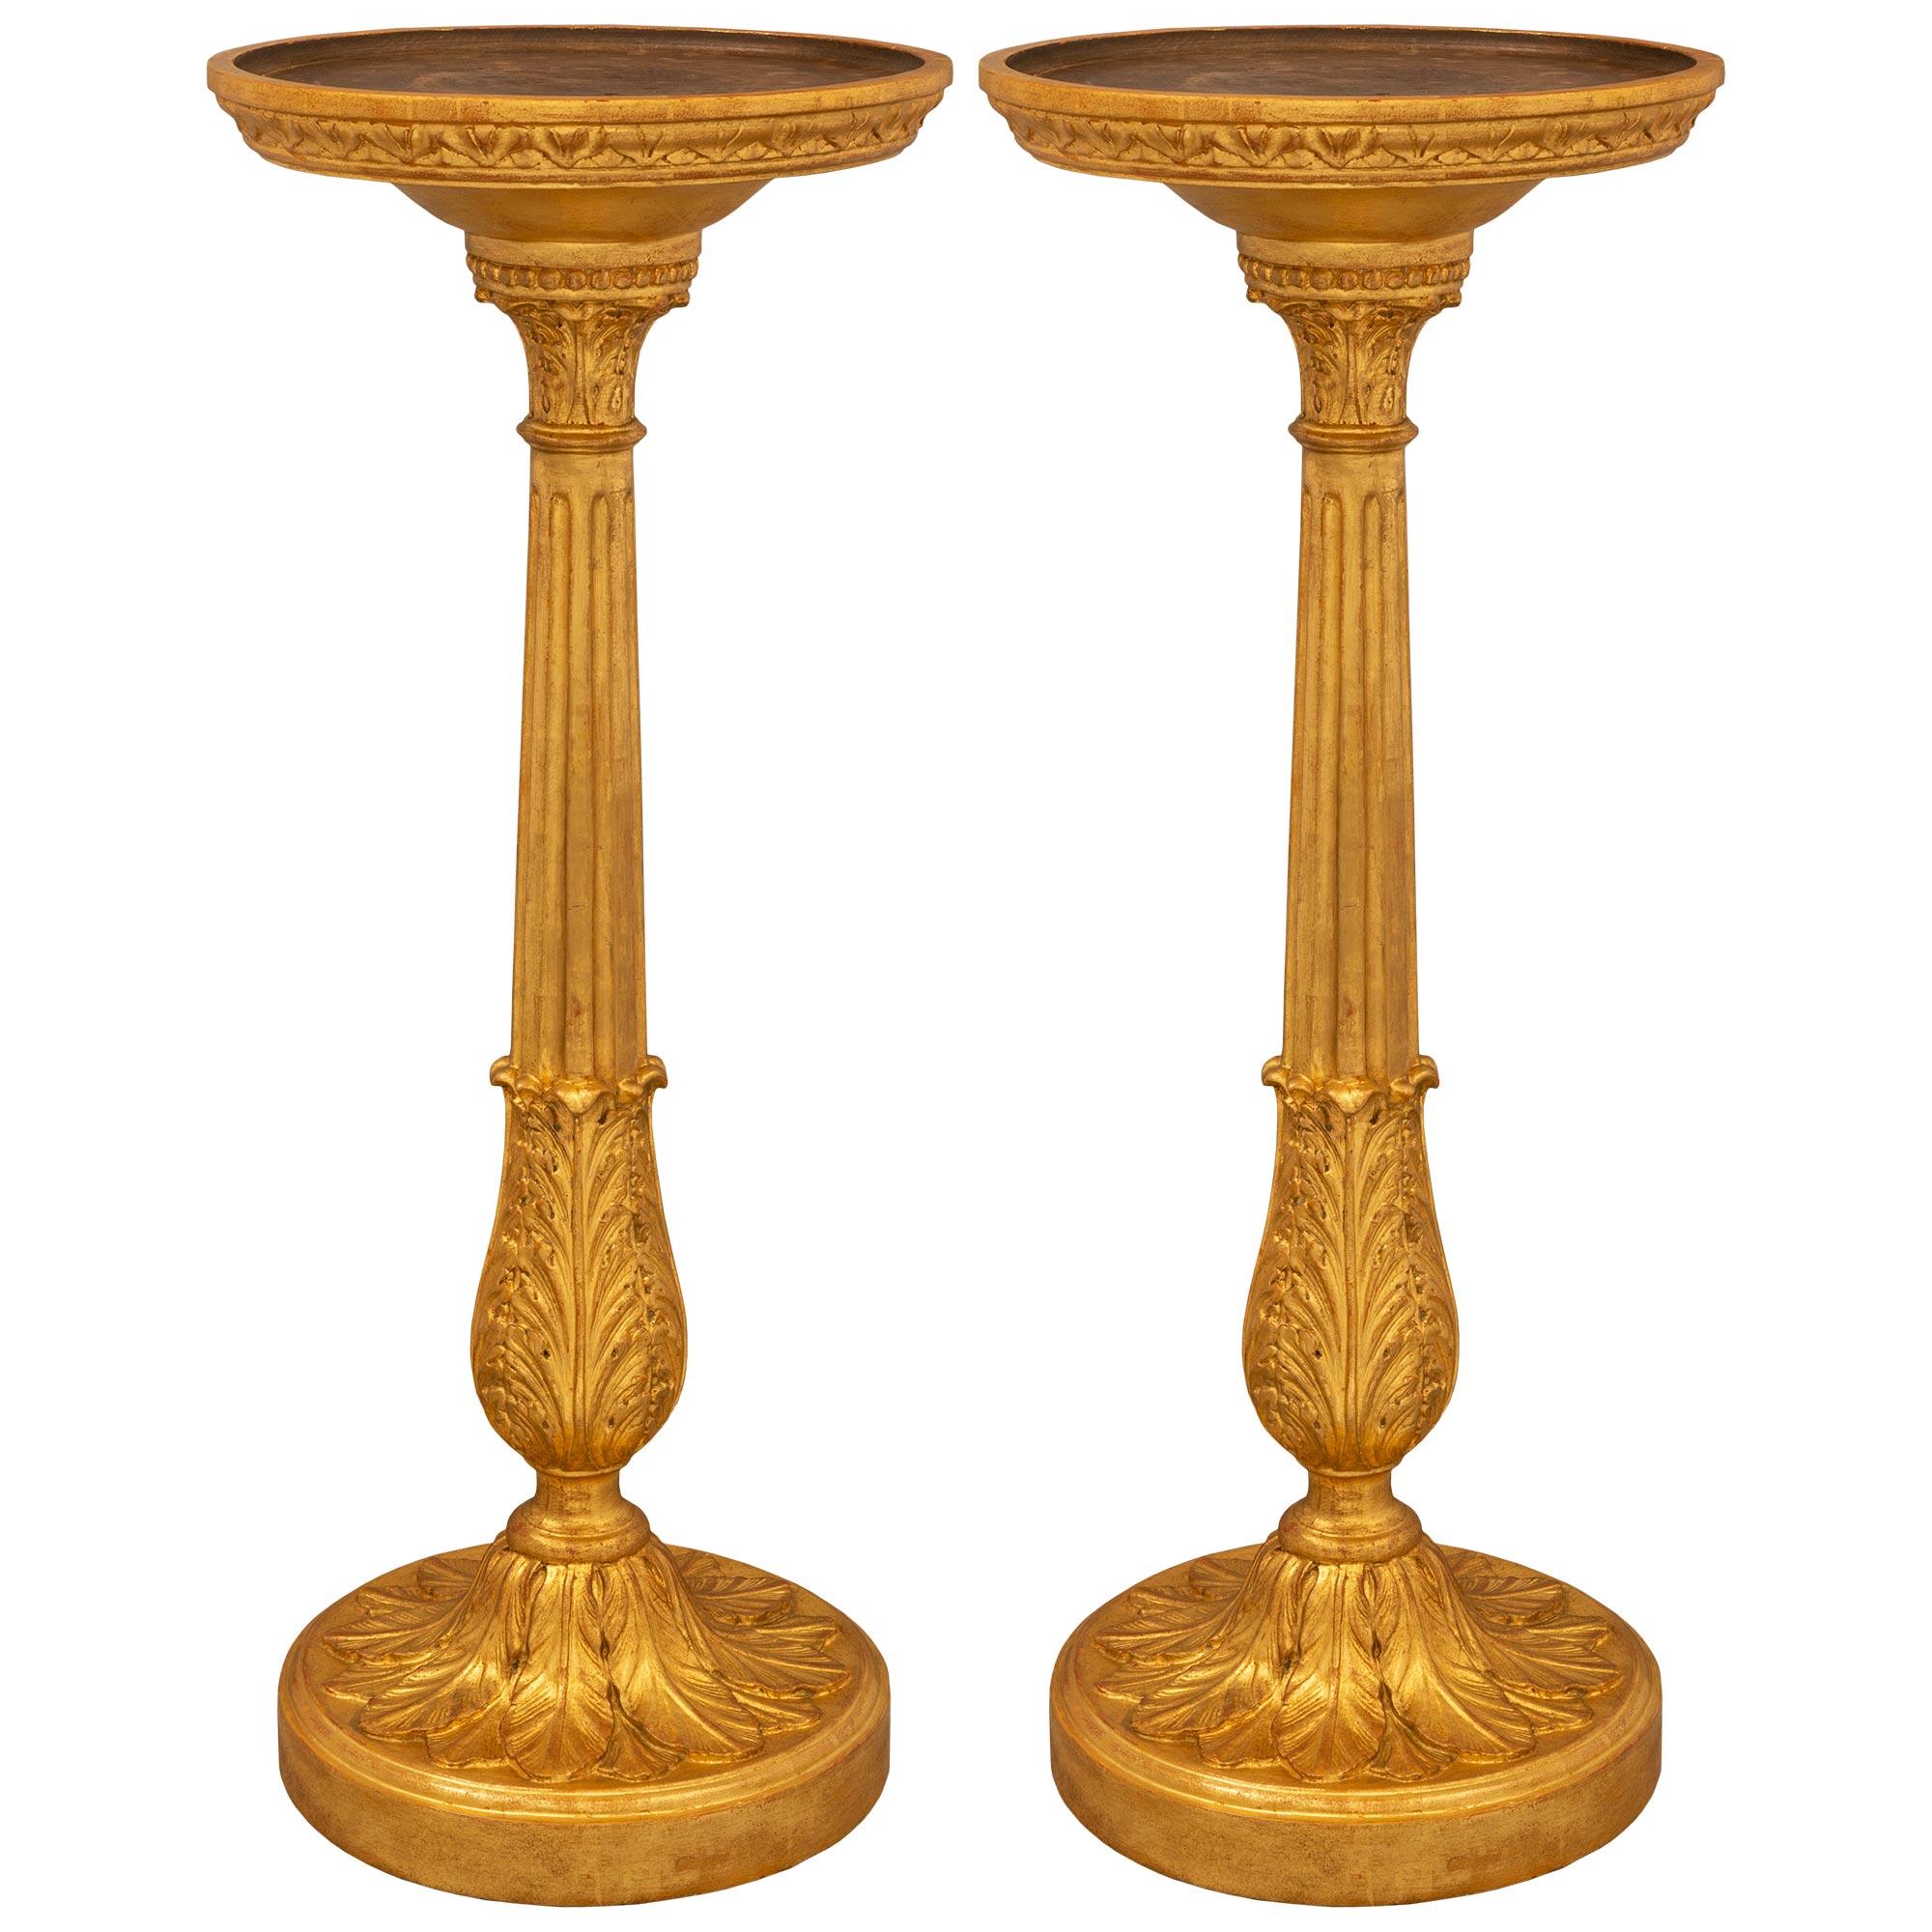 Pair of French 18th Century Louis XVI Period Giltwood & Patinated Wood Pedestals For Sale 6